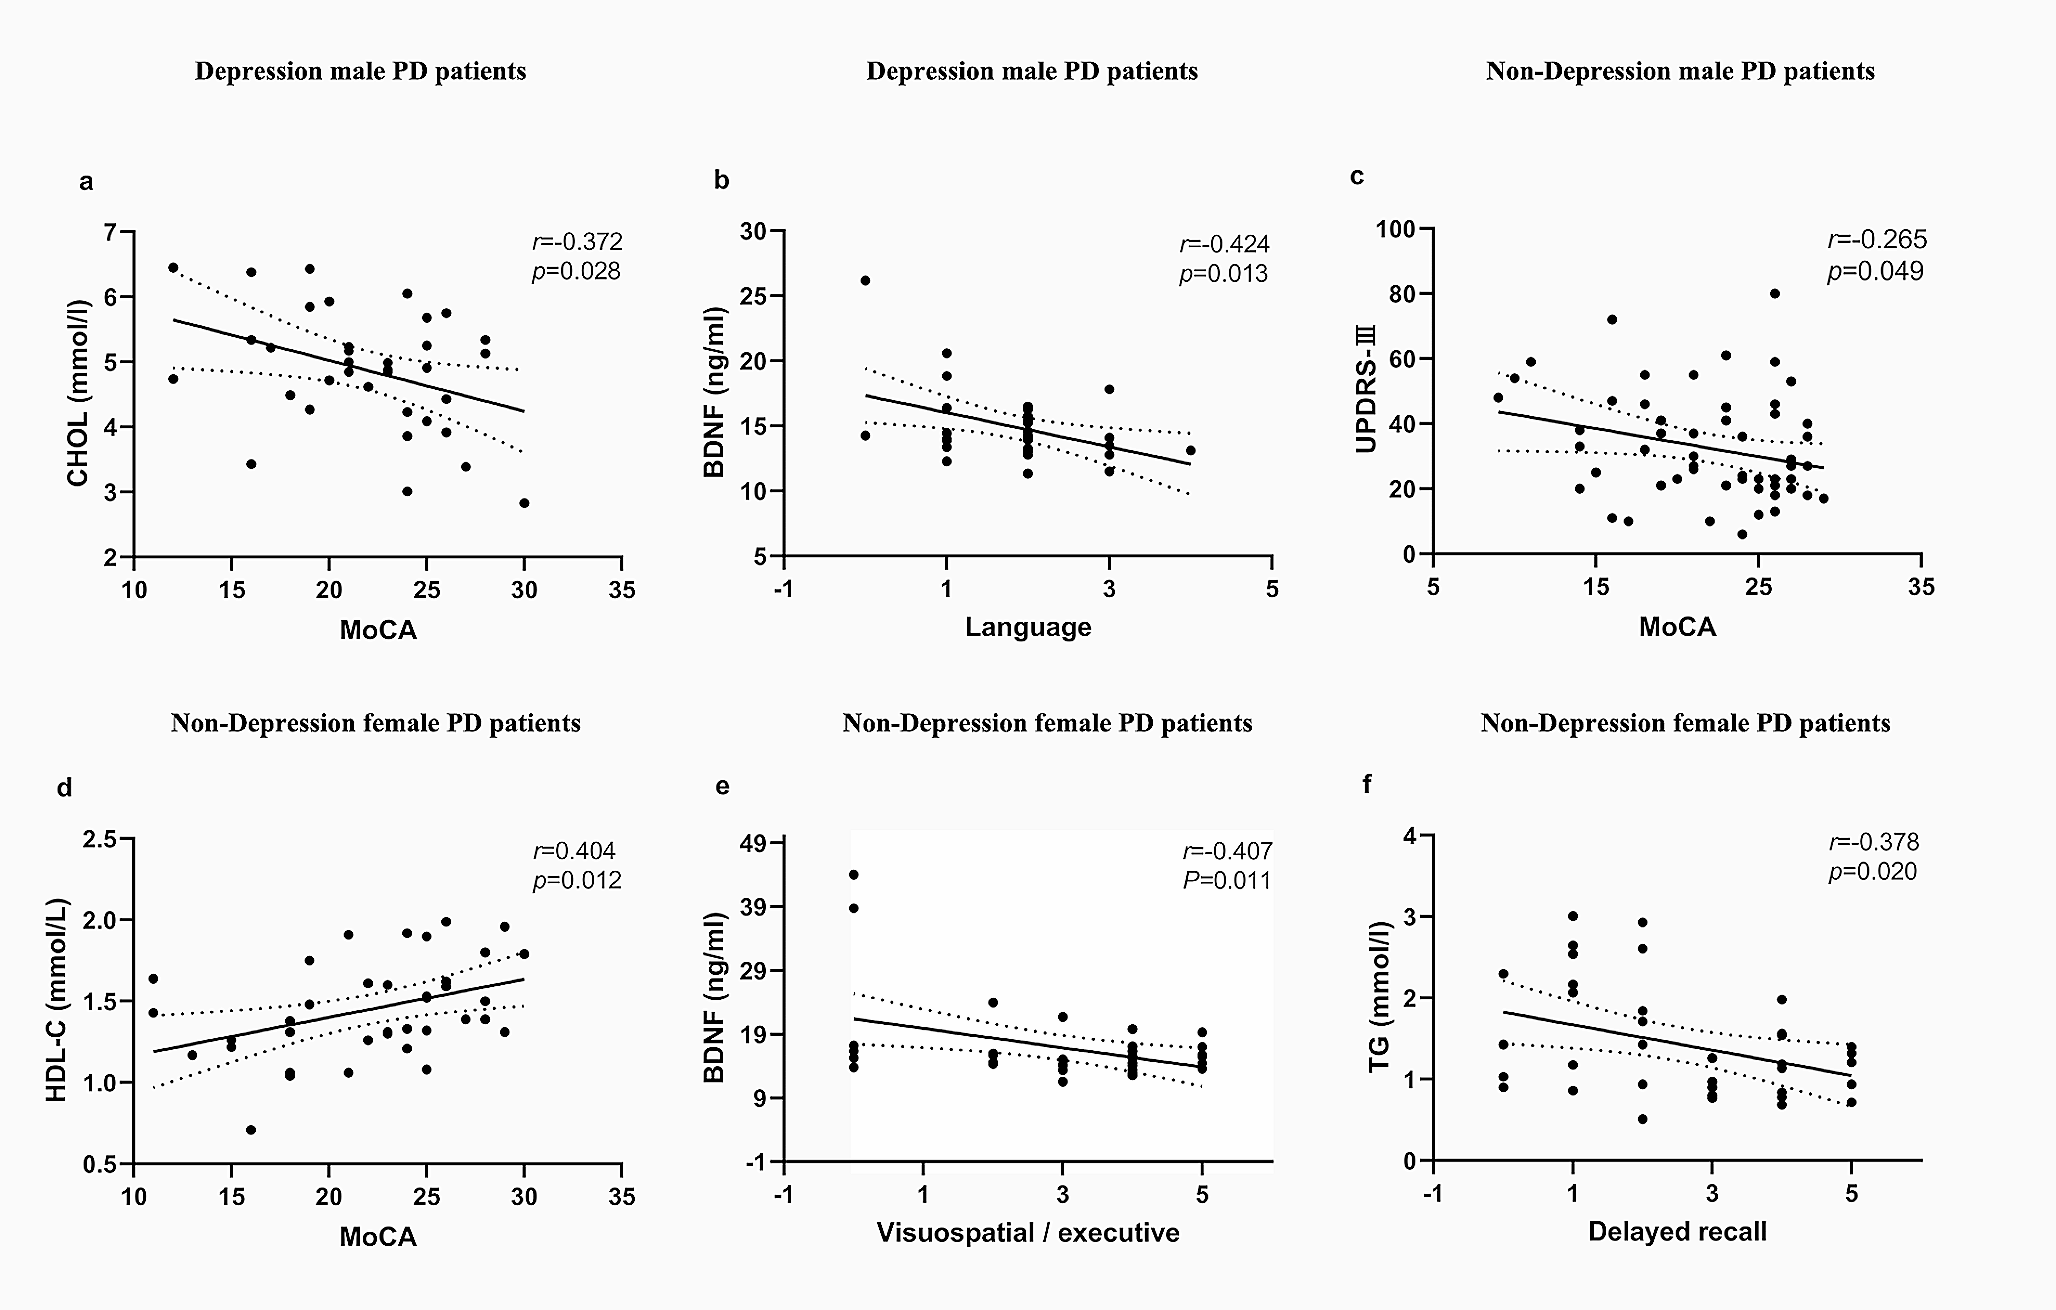 Sex-dependent associations of serum BDNF, glycolipid metabolism and cognitive impairments in Parkinson’s disease with depression: a comprehensive analysis